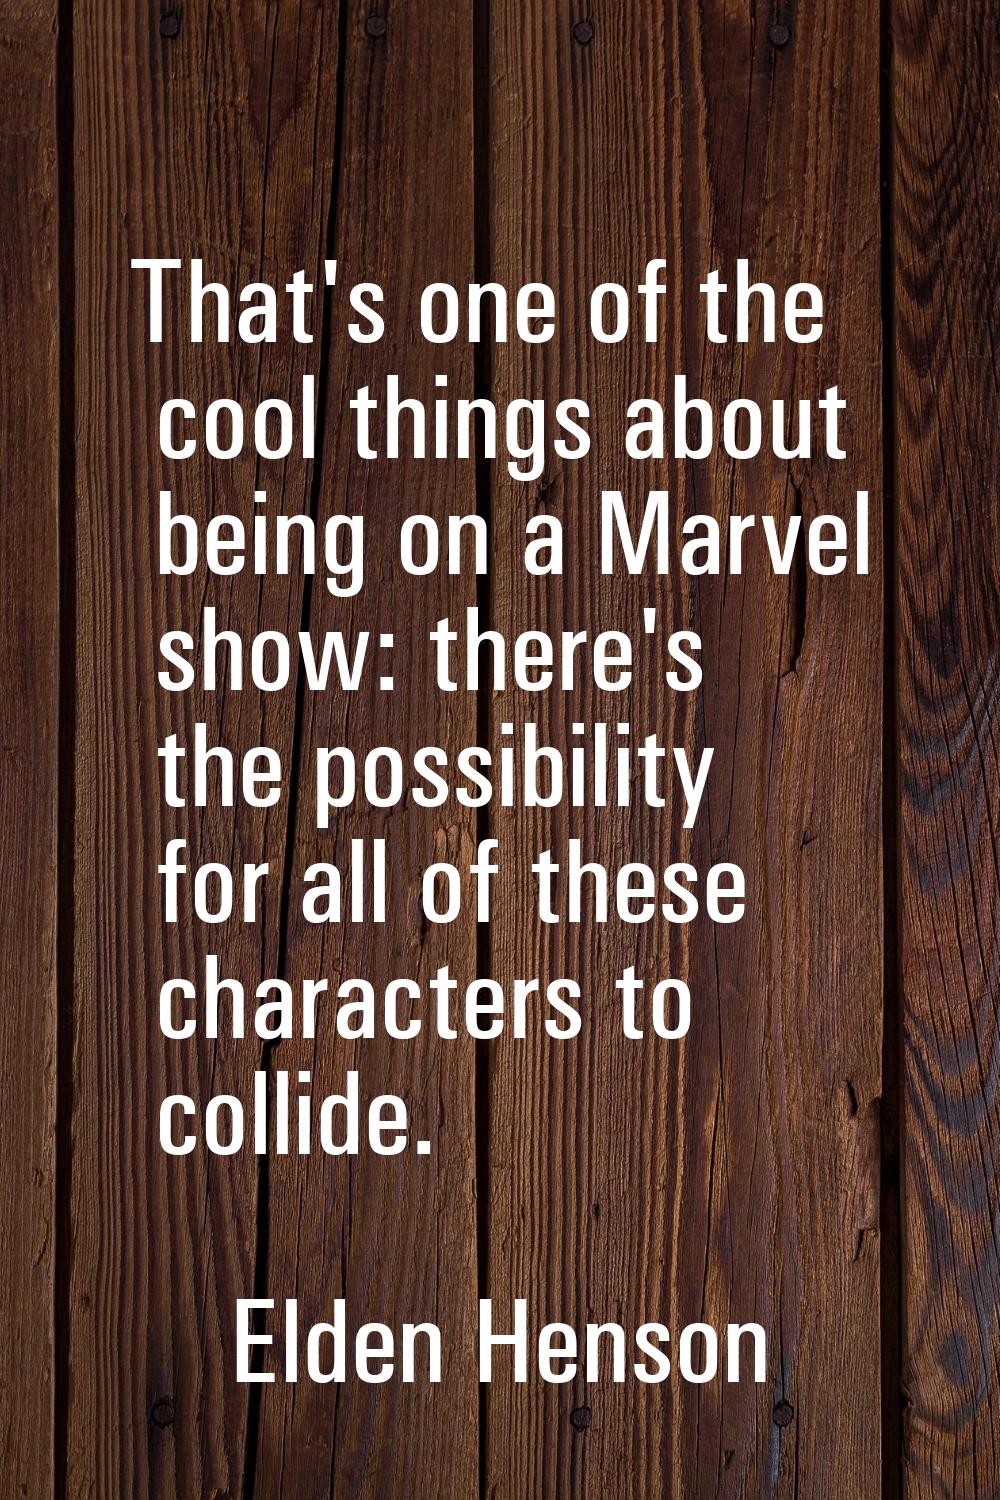 That's one of the cool things about being on a Marvel show: there's the possibility for all of thes